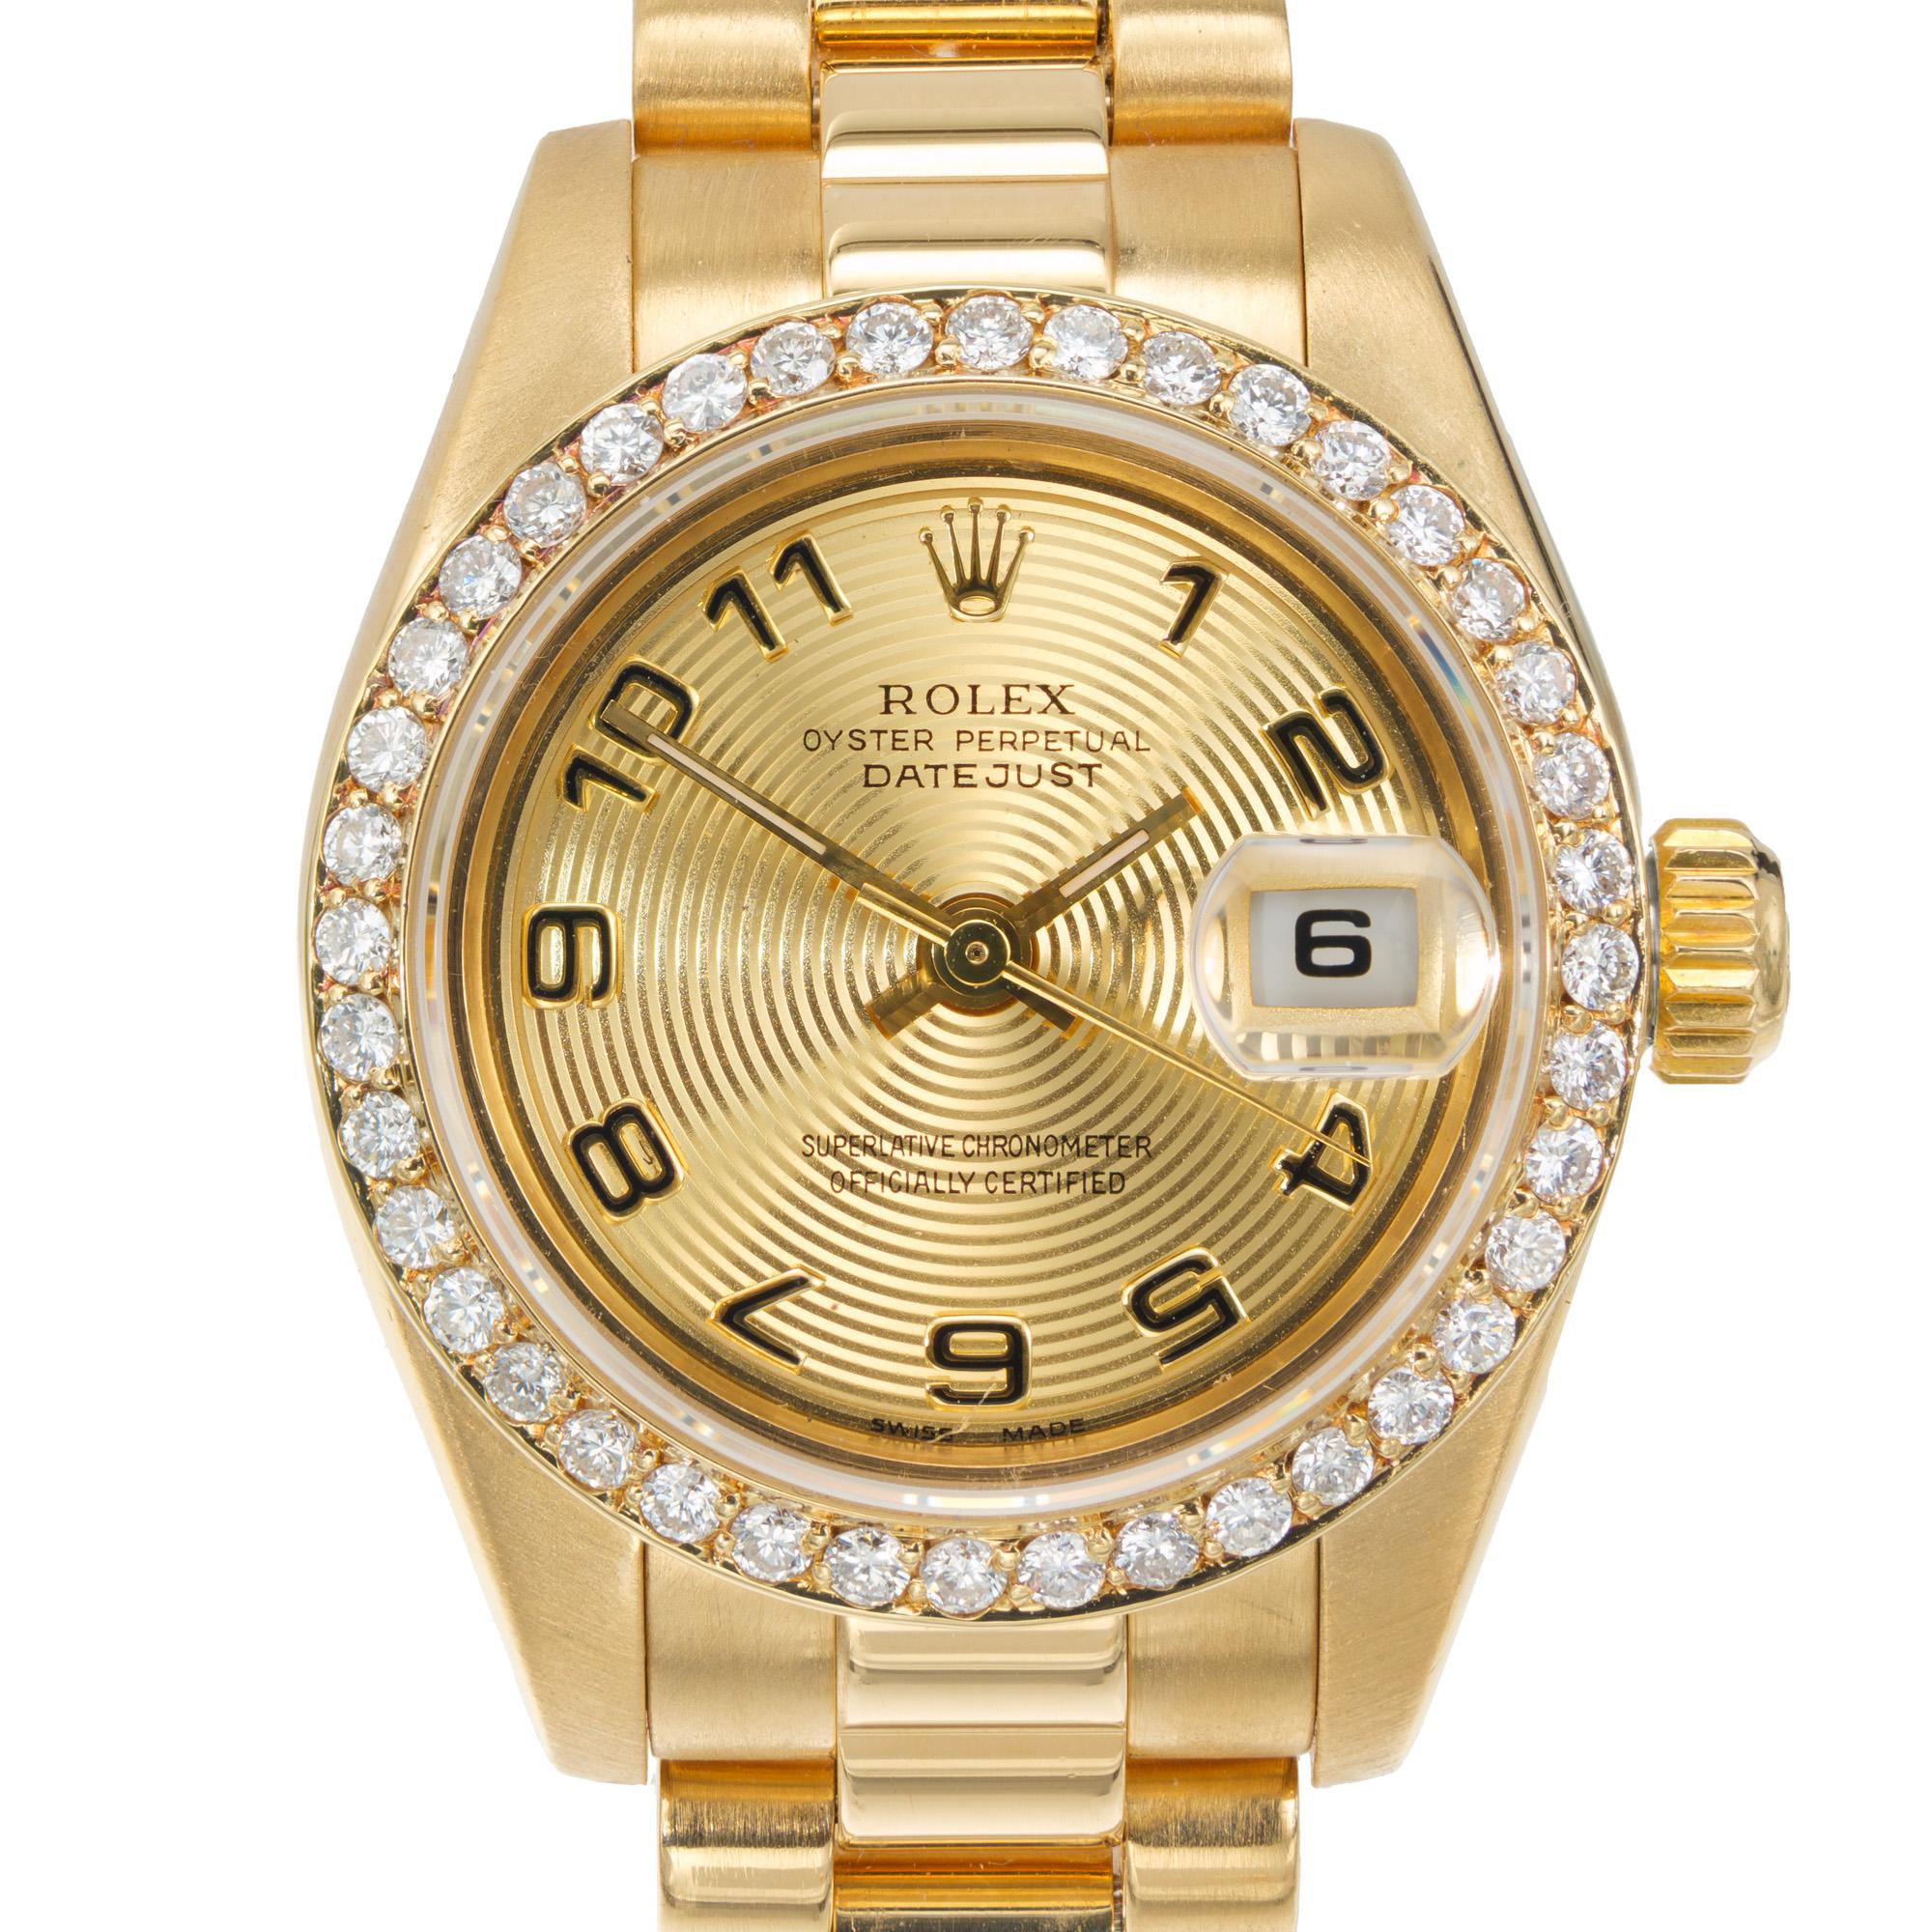 Lady's Rolex President Date Just turntable wristwatch model 179138. Factory Turntable dial with a diamond bezel in 18k yellow gold. 6.5 inches. The band oyster band has no visible stretch or wear. Circa 2001. Rolex box included. No papers. 

Length: